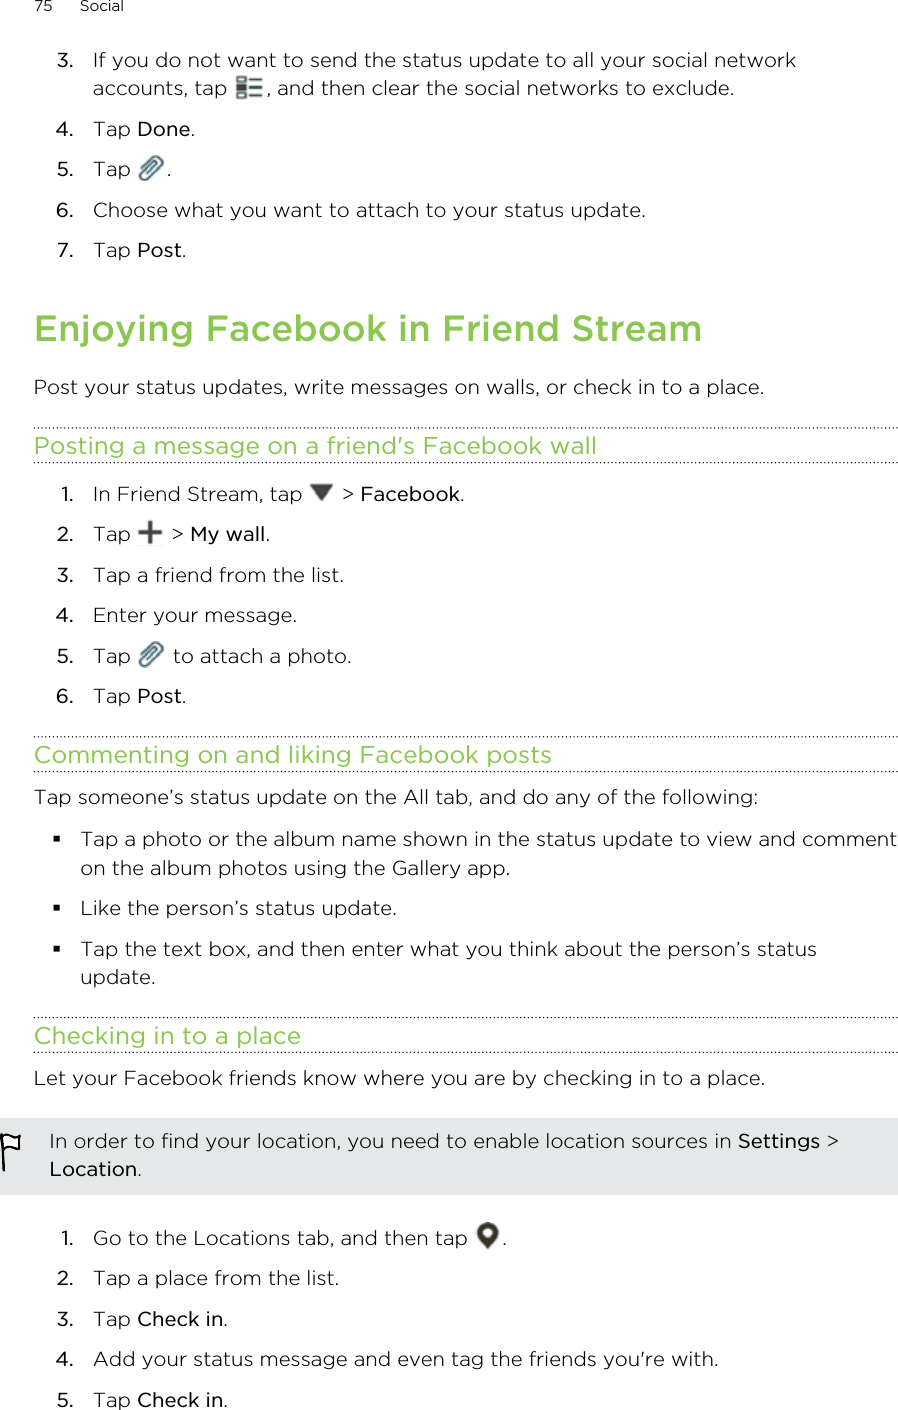 3. If you do not want to send the status update to all your social networkaccounts, tap  , and then clear the social networks to exclude.4. Tap Done.5. Tap  .6. Choose what you want to attach to your status update.7. Tap Post.Enjoying Facebook in Friend StreamPost your status updates, write messages on walls, or check in to a place.Posting a message on a friend&apos;s Facebook wall1. In Friend Stream, tap   &gt; Facebook.2. Tap   &gt; My wall.3. Tap a friend from the list.4. Enter your message.5. Tap   to attach a photo.6. Tap Post.Commenting on and liking Facebook postsTap someone’s status update on the All tab, and do any of the following: Tap a photo or the album name shown in the status update to view and commenton the album photos using the Gallery app.Like the person’s status update.Tap the text box, and then enter what you think about the person’s statusupdate.Checking in to a placeLet your Facebook friends know where you are by checking in to a place.In order to find your location, you need to enable location sources in Settings &gt;Location.1. Go to the Locations tab, and then tap  .2. Tap a place from the list.3. Tap Check in.4. Add your status message and even tag the friends you&apos;re with.5. Tap Check in.75 Social